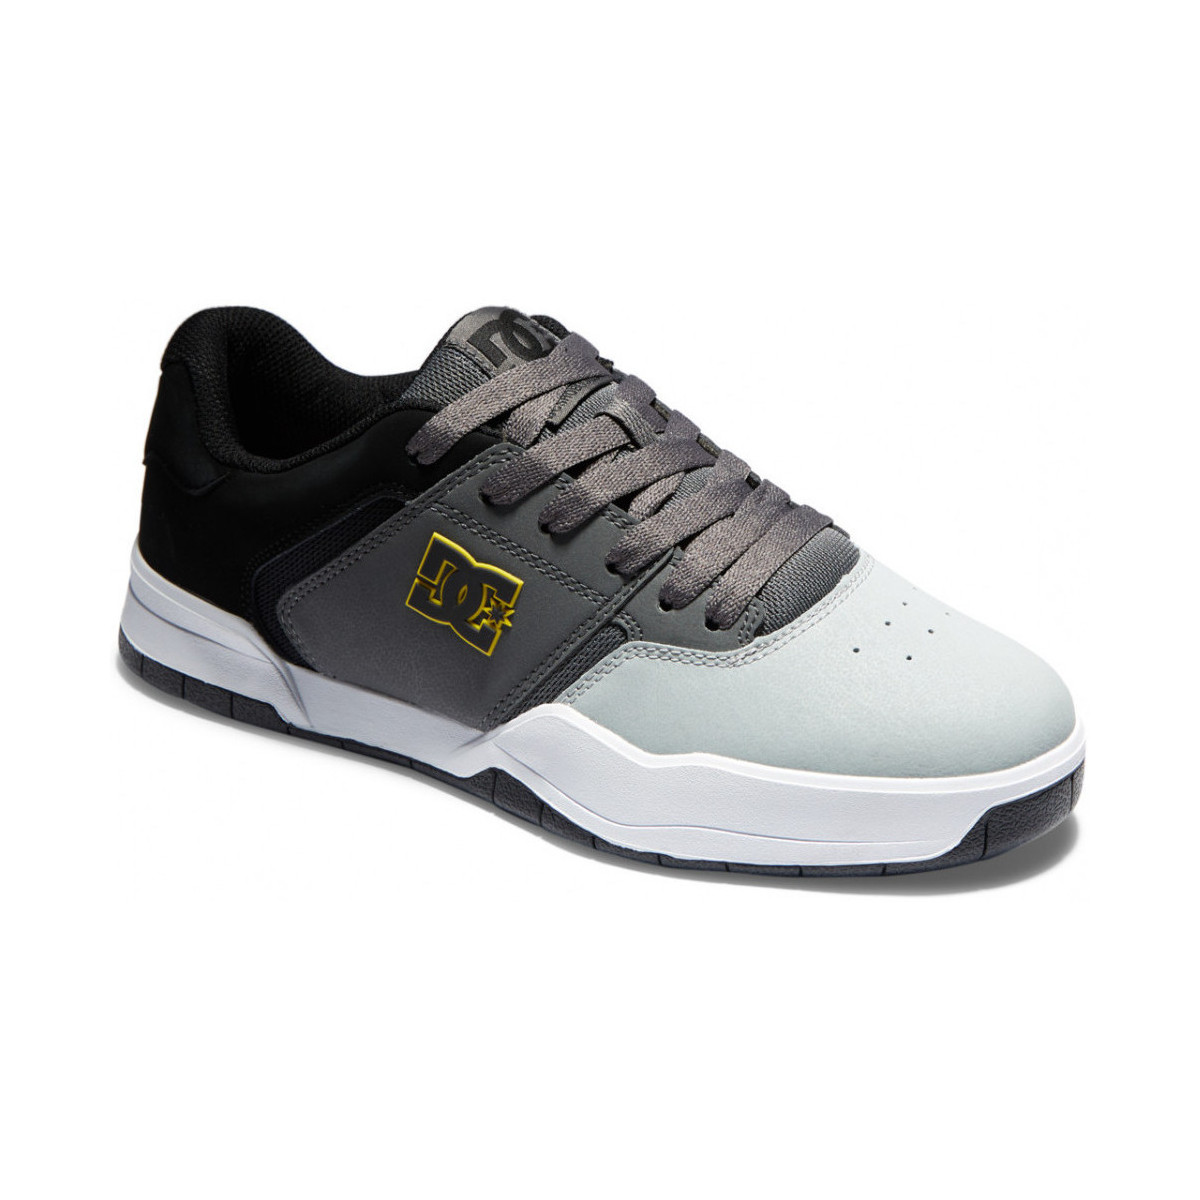 Chaussures Chaussures de Skate DC Shoes CENTRAL black grey yellow Gris